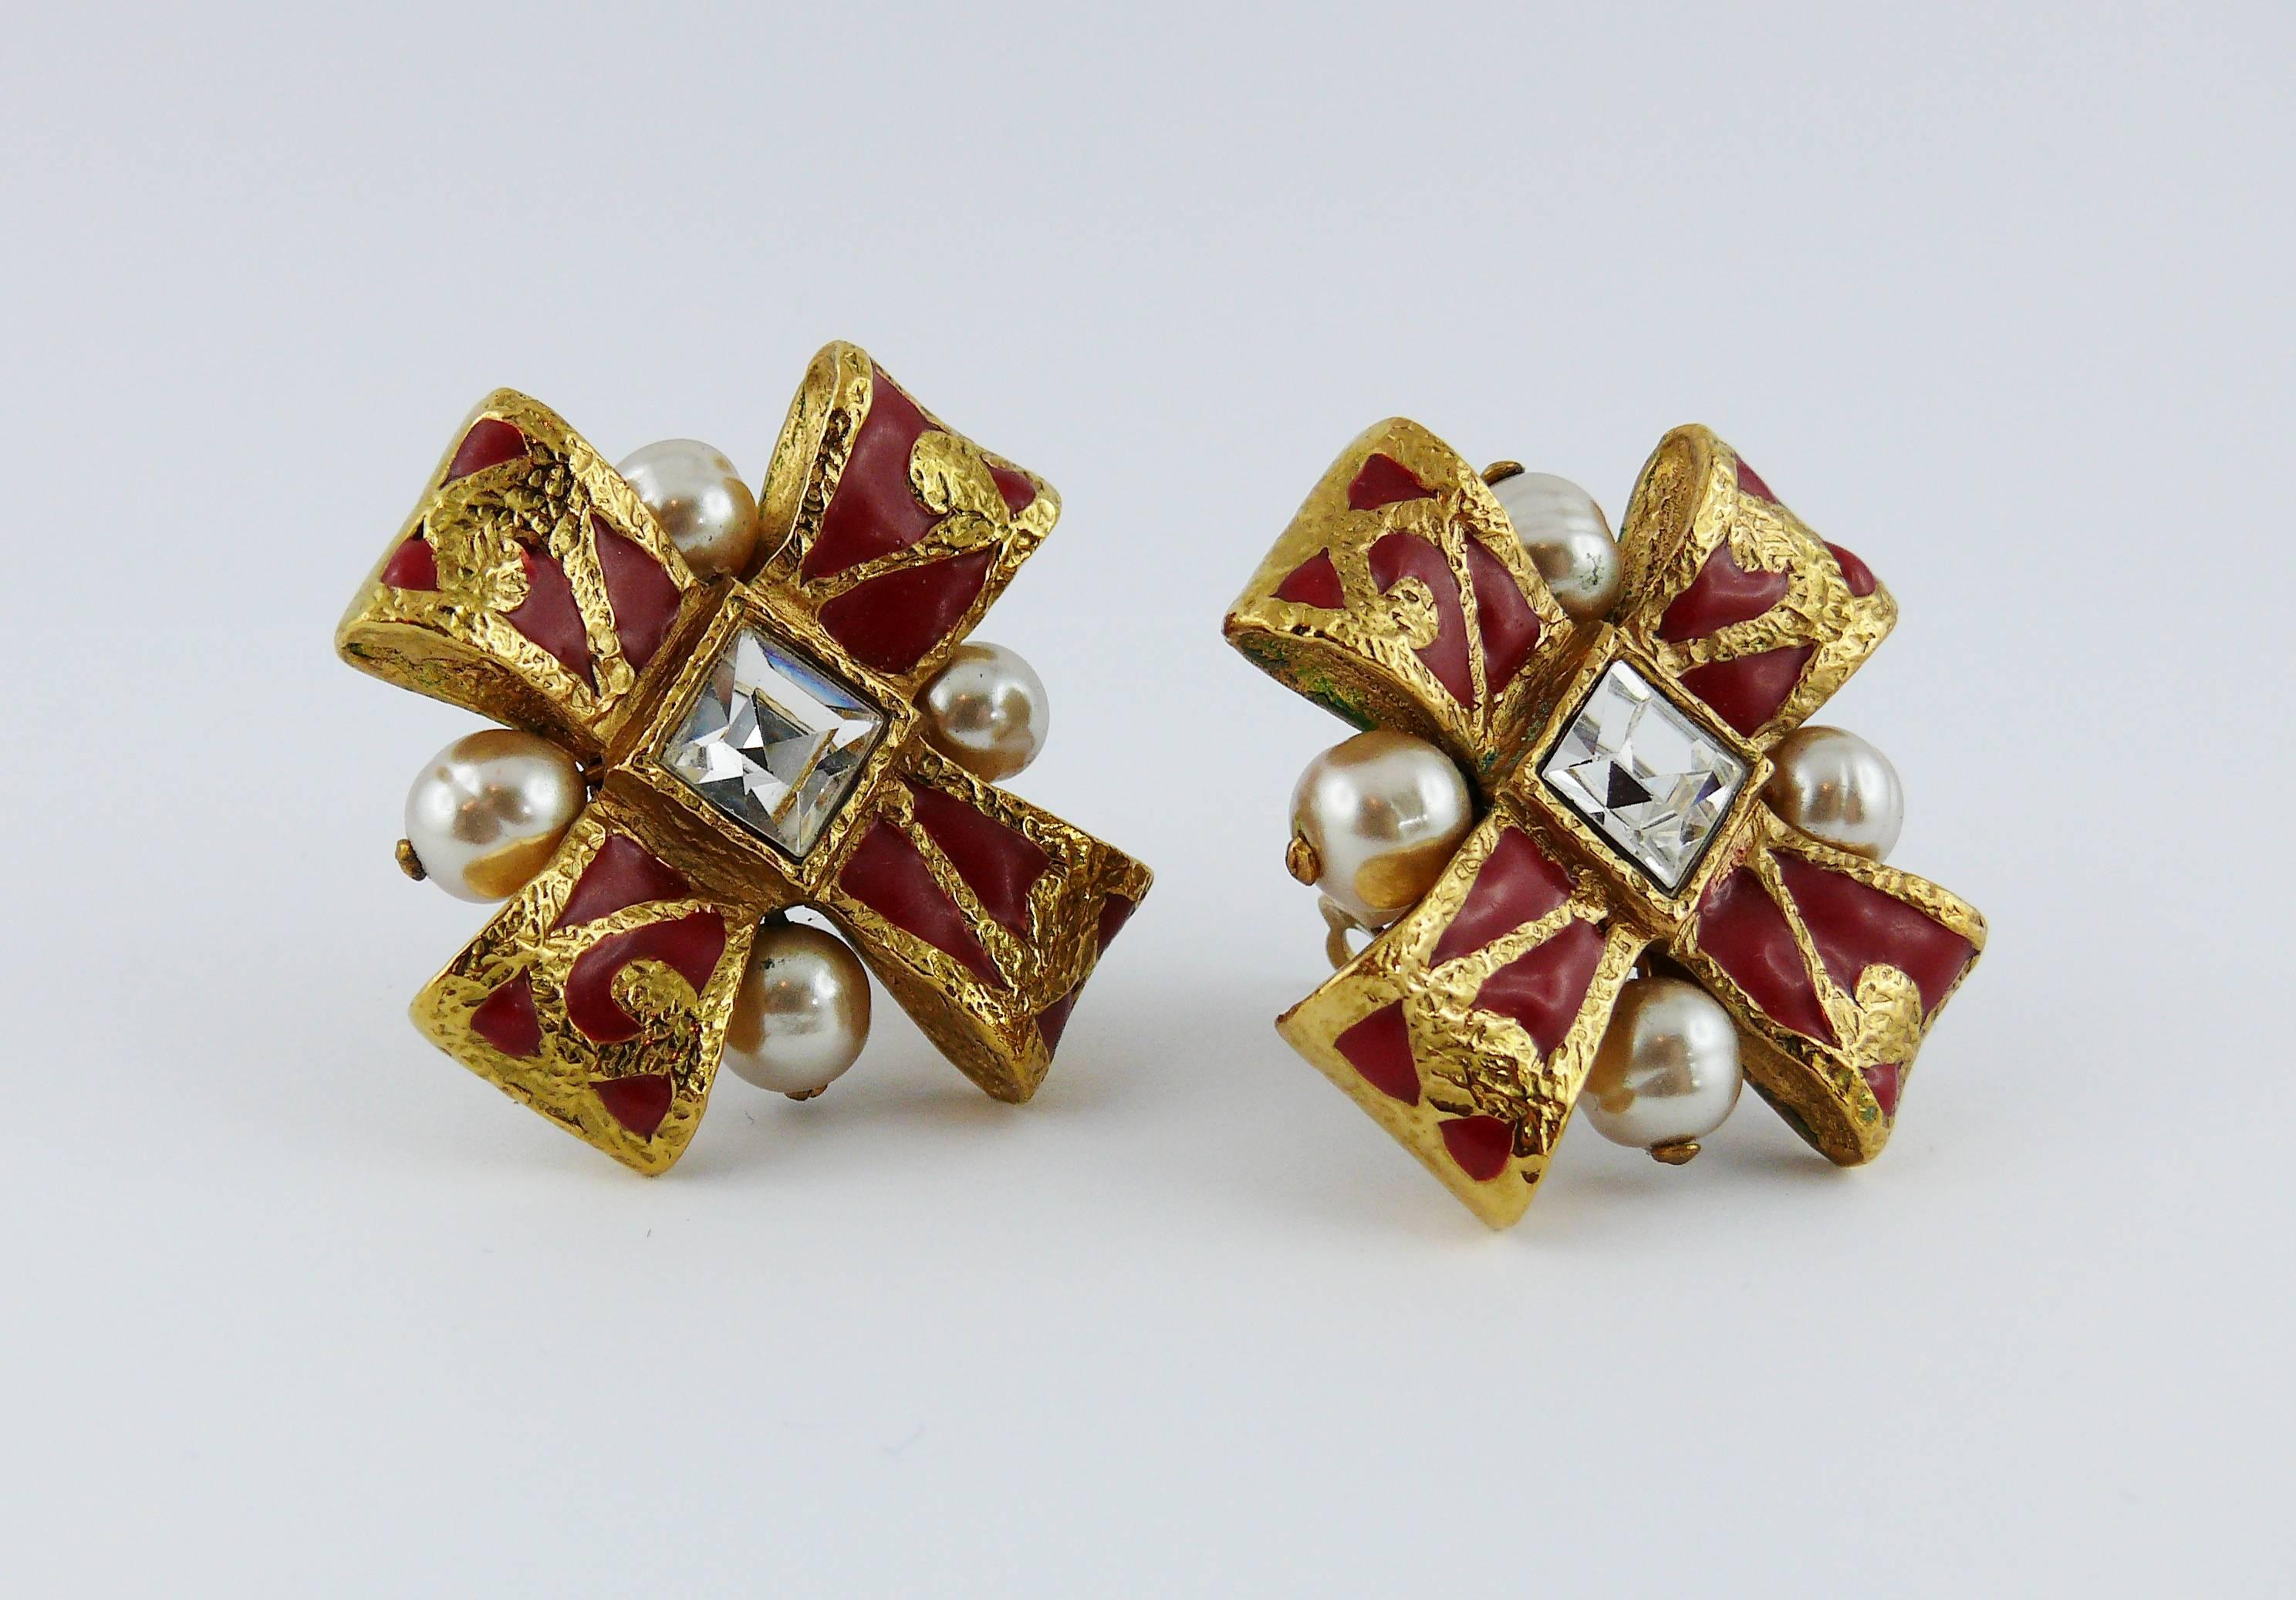 CHRISTIAN LACROIX vintage clip-on earrings featuring a gold toned and enameled bow with faux pearl embellishement.

Marked CHRISTIAN LACROIX CL Made in France.

Indicative measurements : length approx. 3.9 cm (1.54 inches) / width approx. 3.9 cm